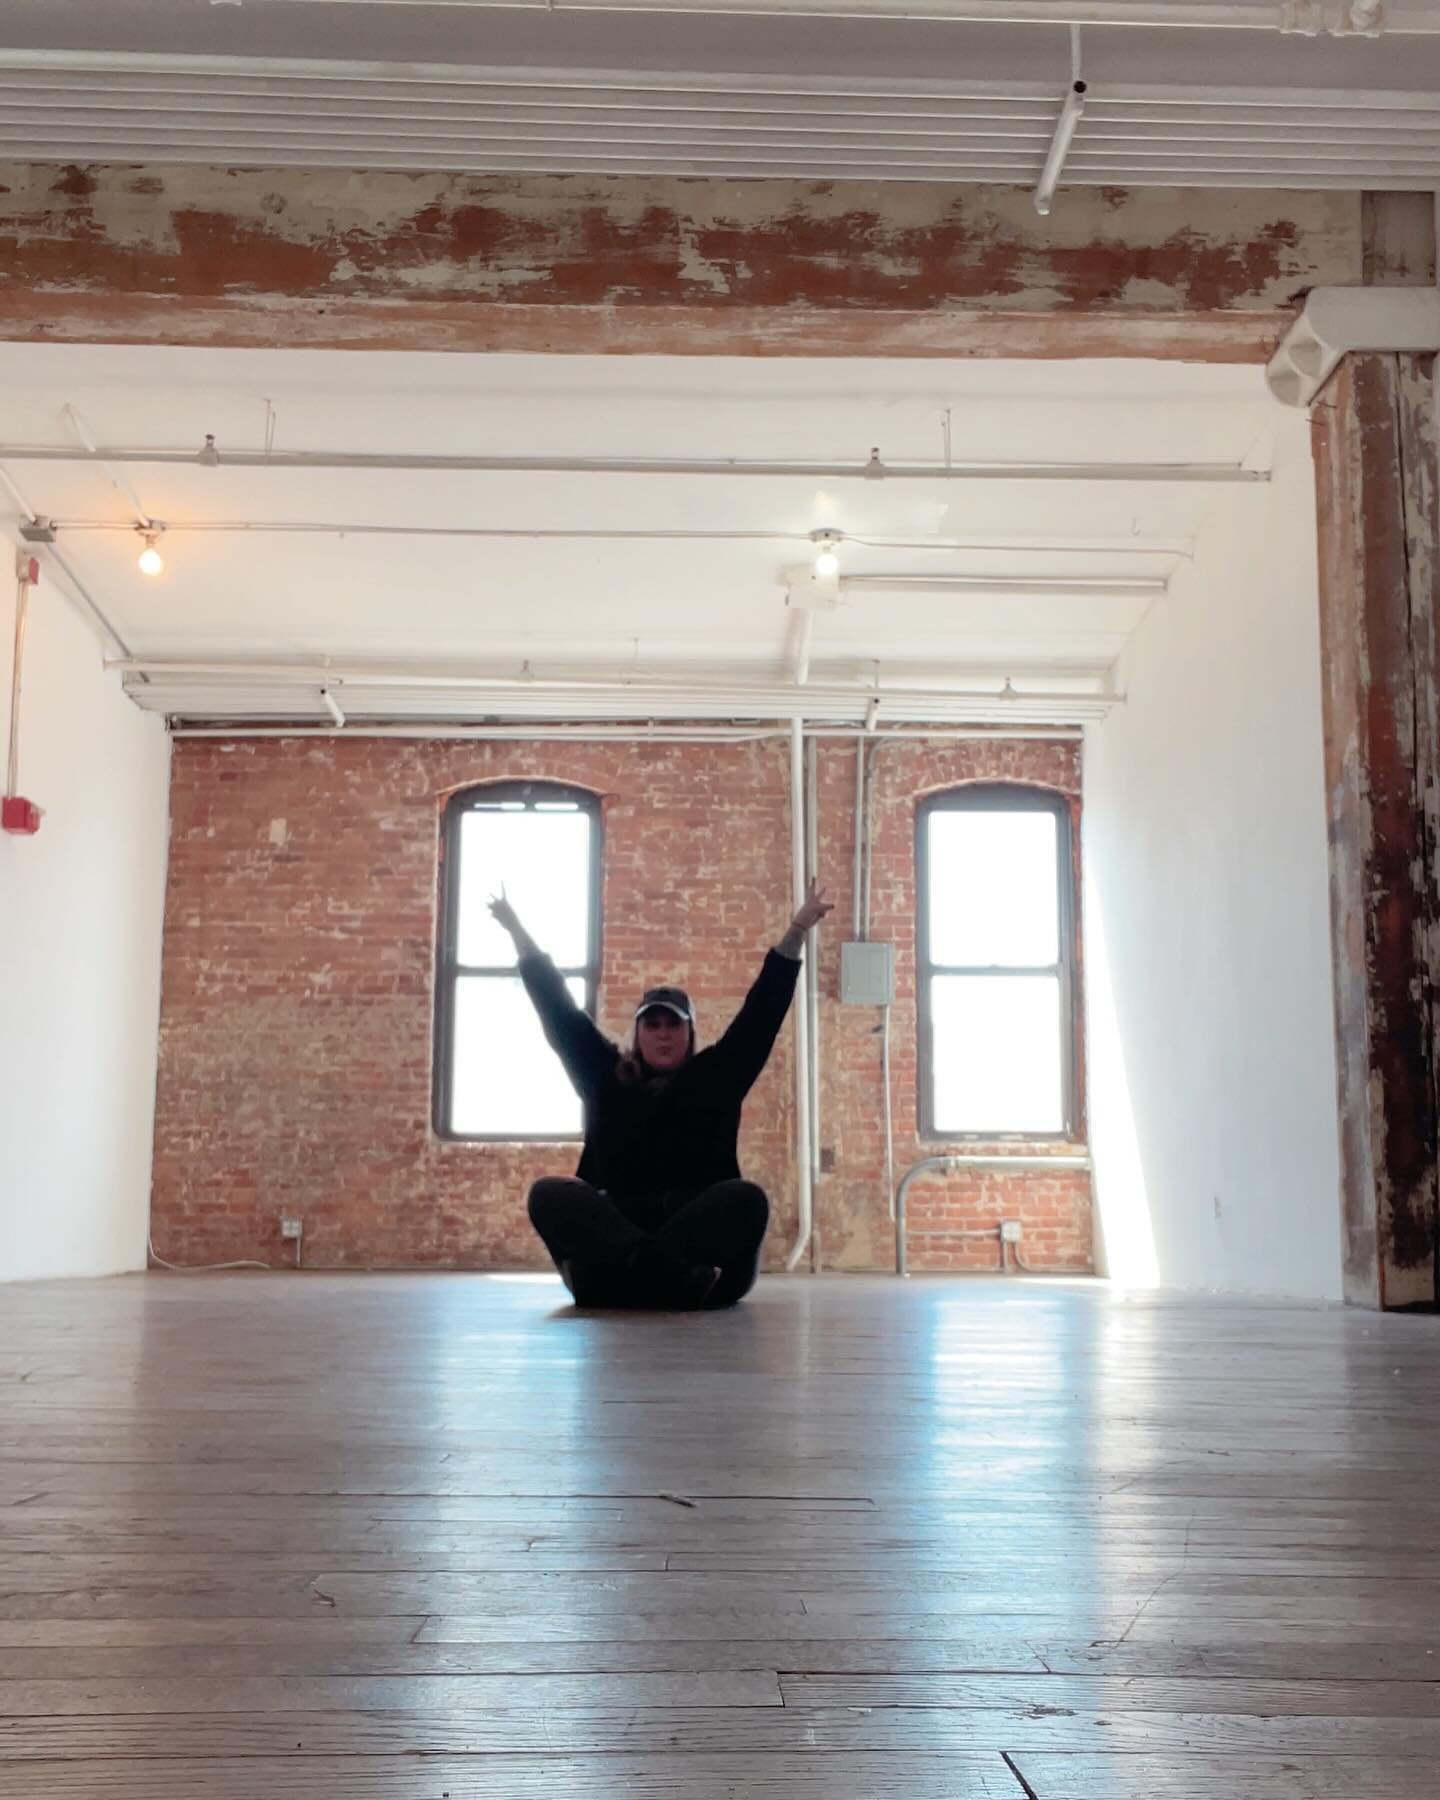 BREAKING NEWS! I&rsquo;m so excited to announce the Grace and Grit studio will be moving to 37 Greenpoint Ave this summer! 

Being more accessible to our loyal customers and clients we&rsquo;ll have workshops, deliveries, shipping of our dried floral